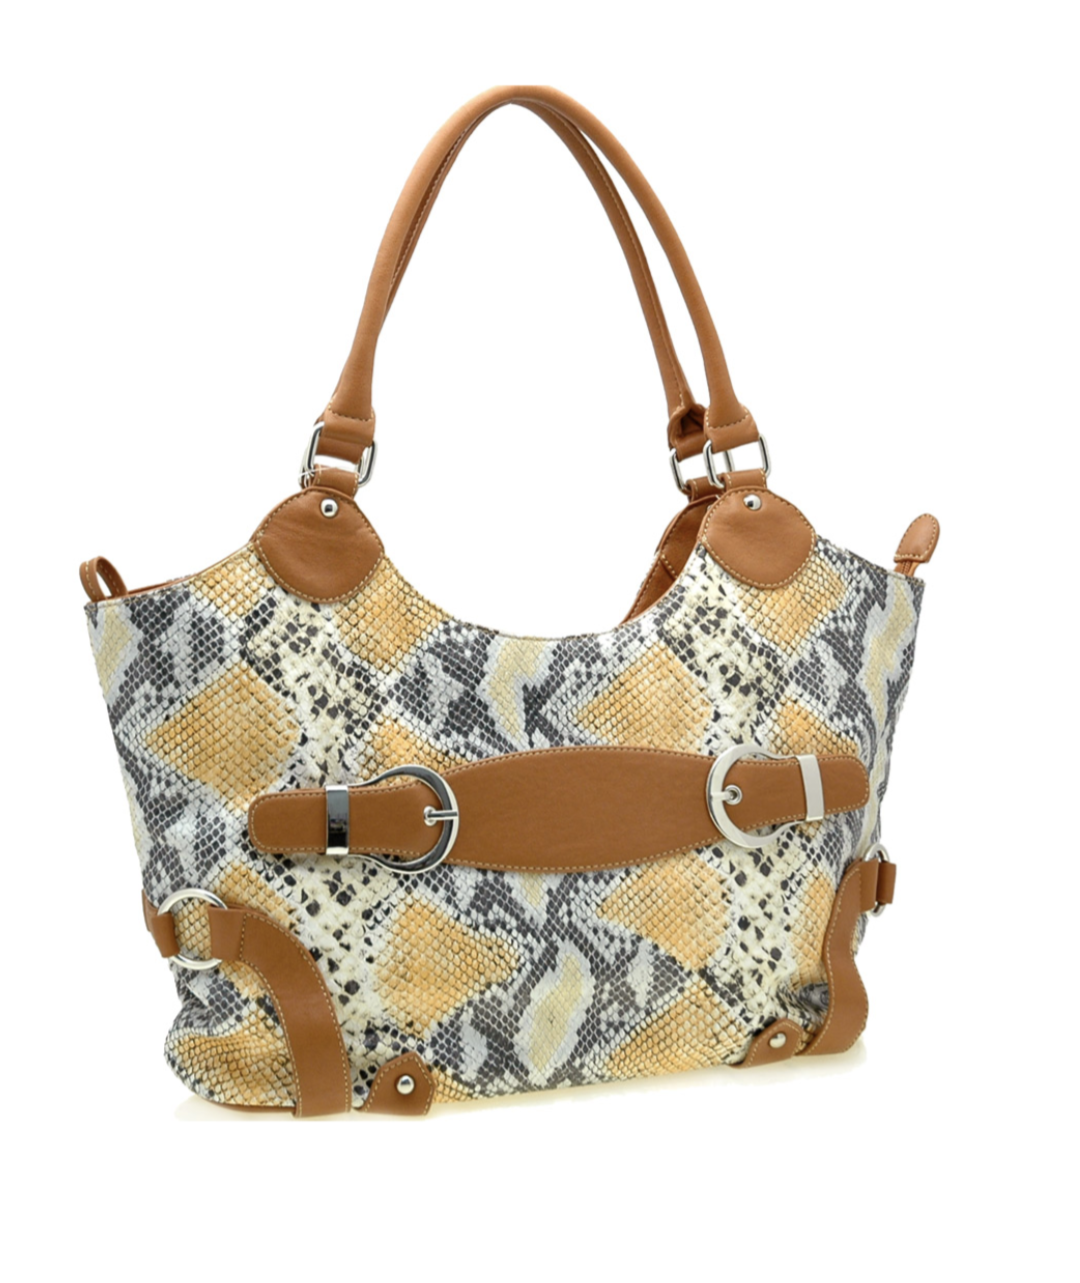 Two-Tone Faux Python Leather Embossed Flap Hobo Bag